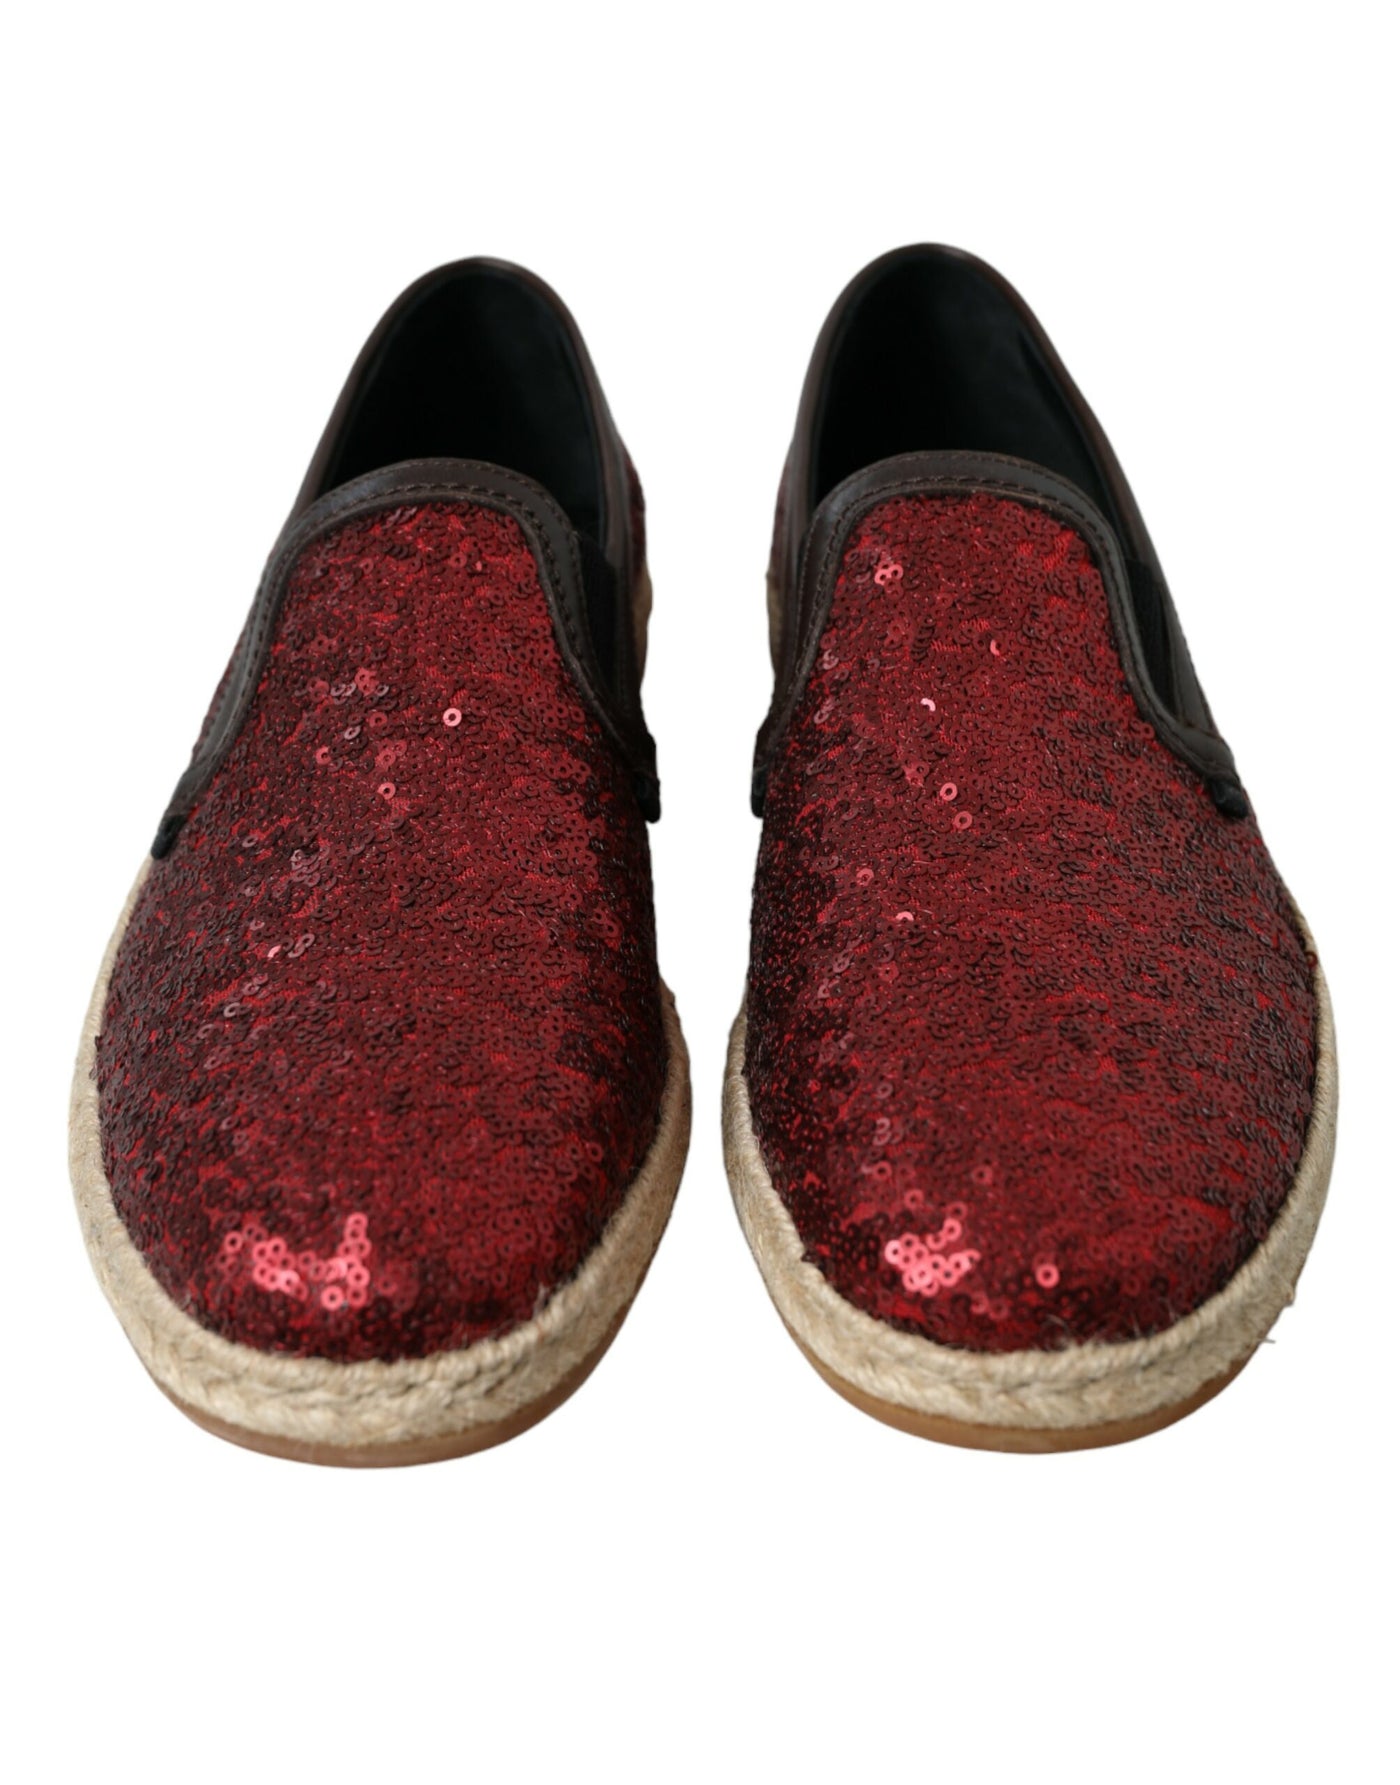 Dolce & Gabbana Red Sequined Loafers Slippers Men Shoes